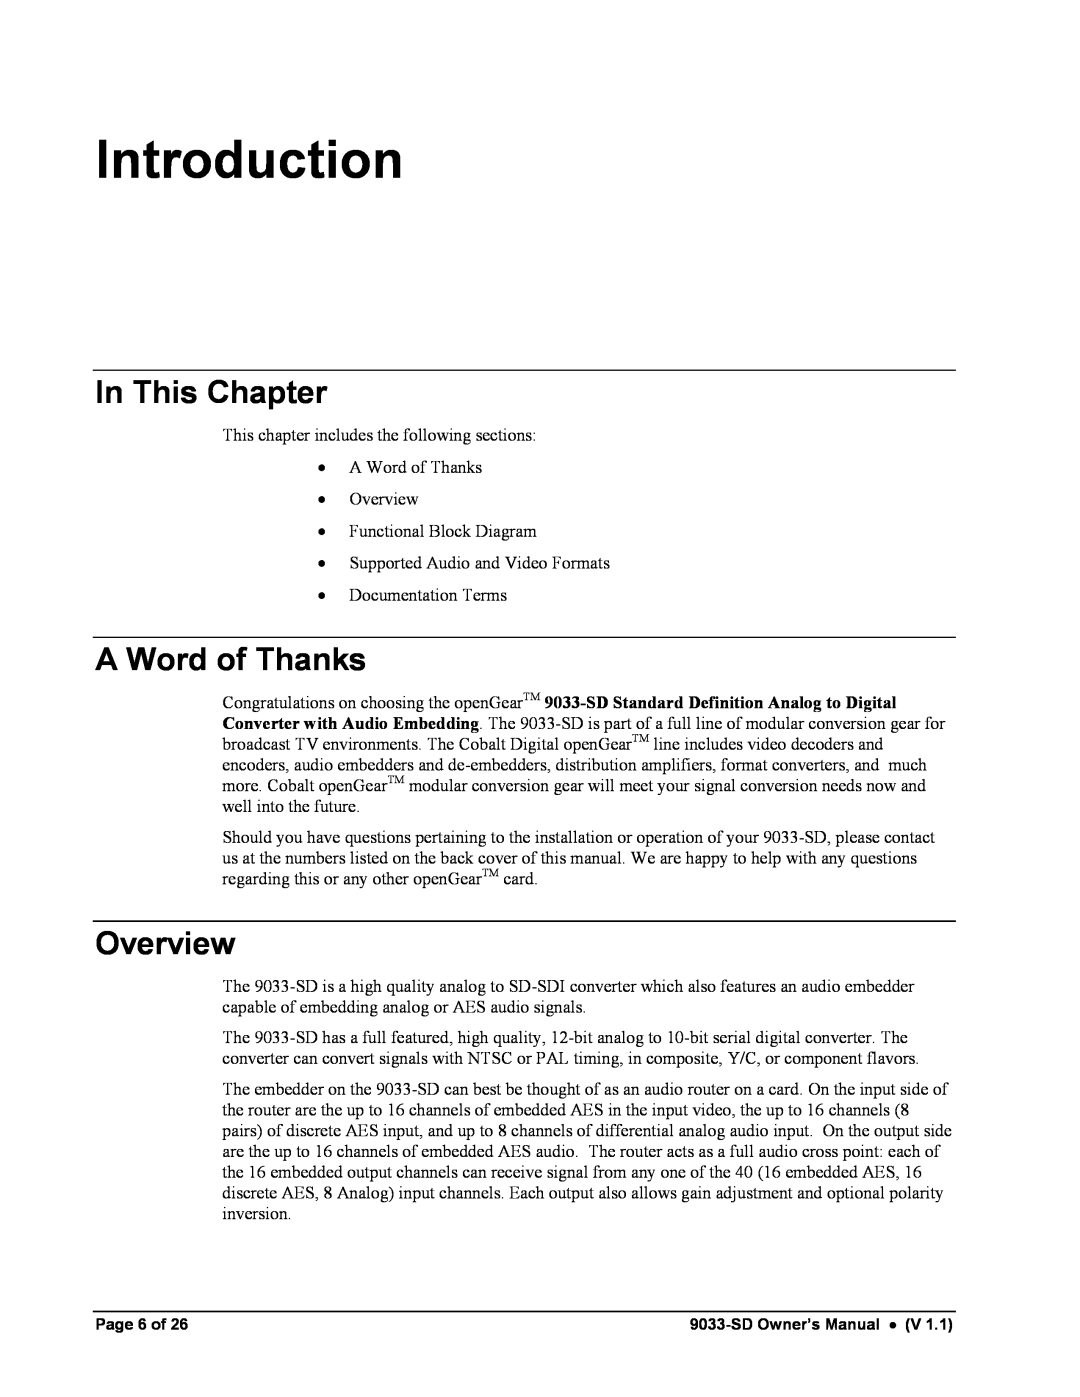 Cobalt Networks 9033-SD owner manual Introduction, In This Chapter, A Word of Thanks, Overview 